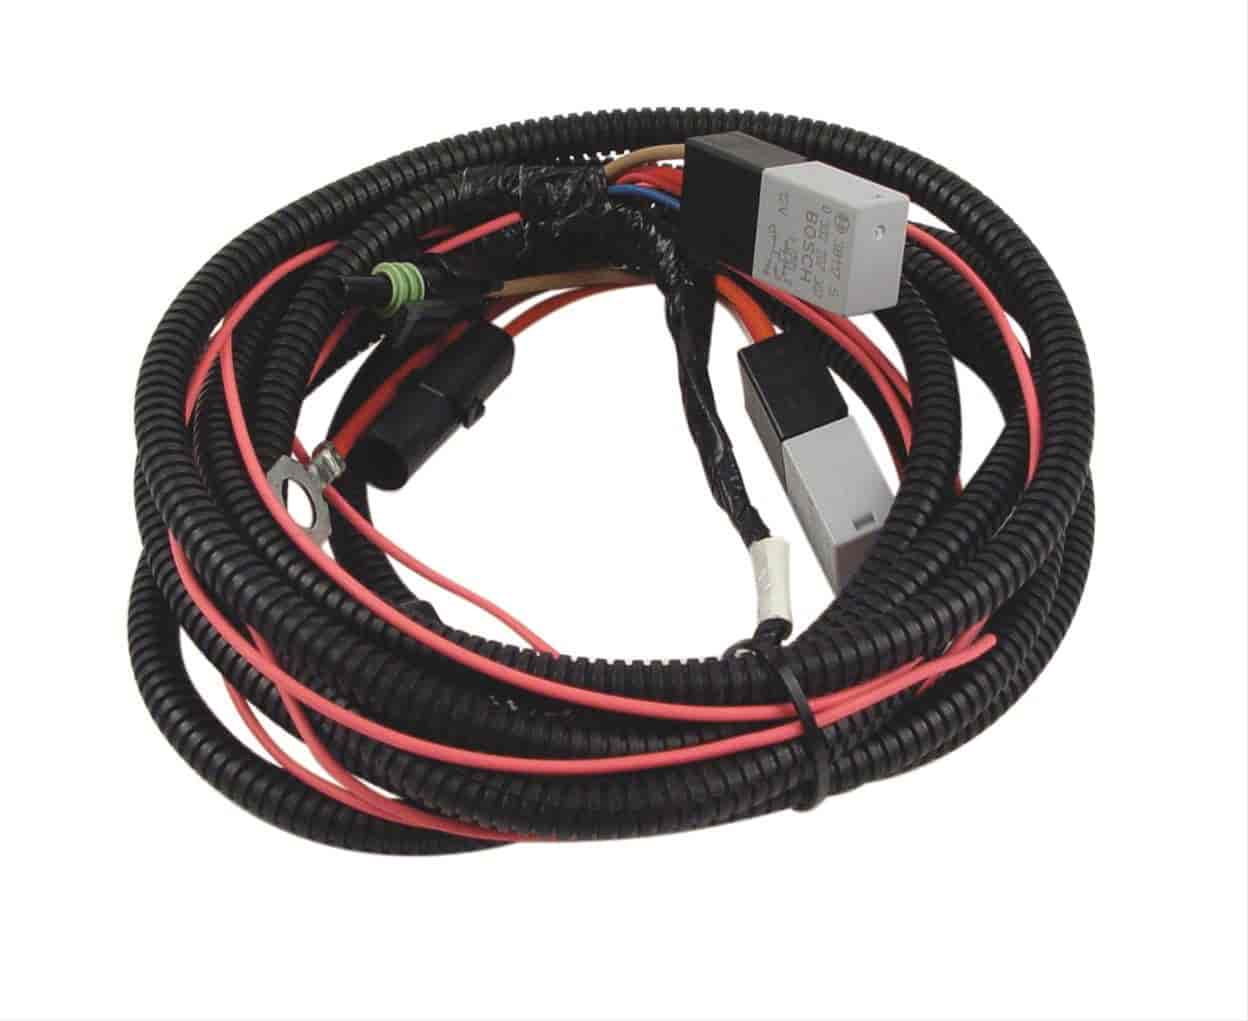 NITROUS CONTROL HARNESS FAST 1/2 STAGE